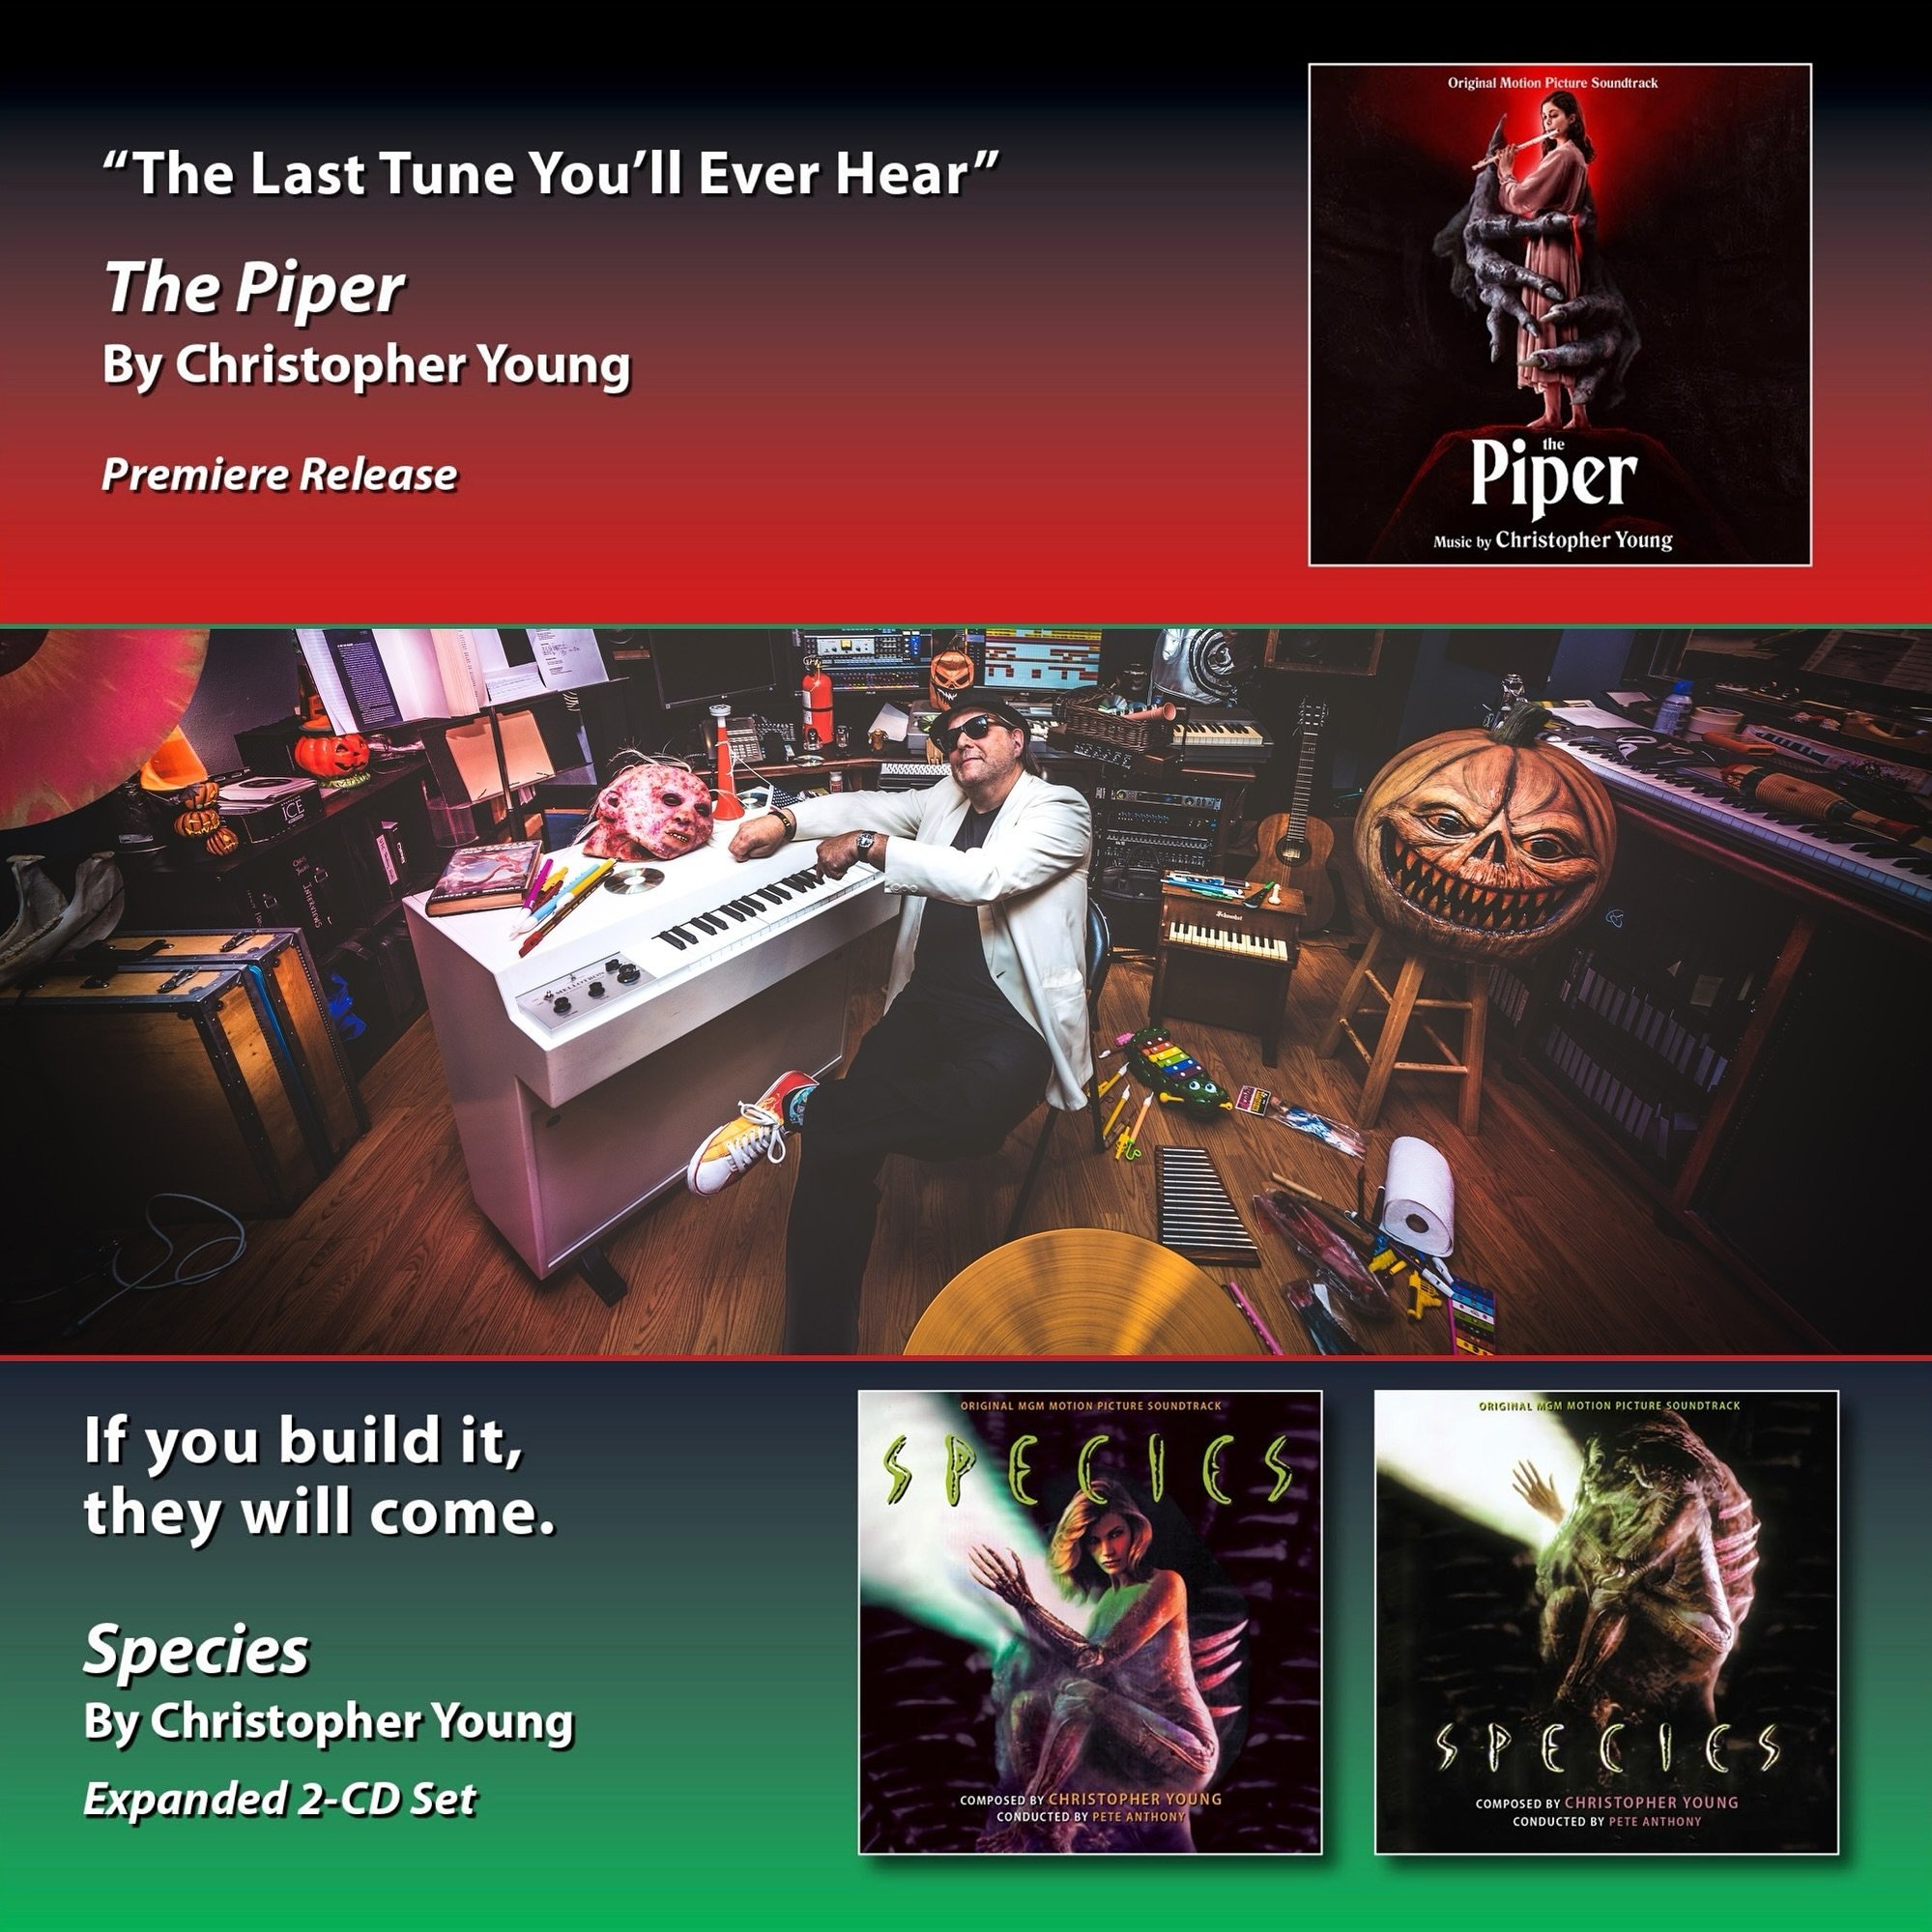 @intradacds has the latest Christopher Young CD&rsquo;s! They just released @officialchristopheryoung&rsquo;s THE PIPER &amp; an expanded edition of his masterful score from SPECIES! THE PIPER (@filmmusiccritics) award-winner) is also available digit